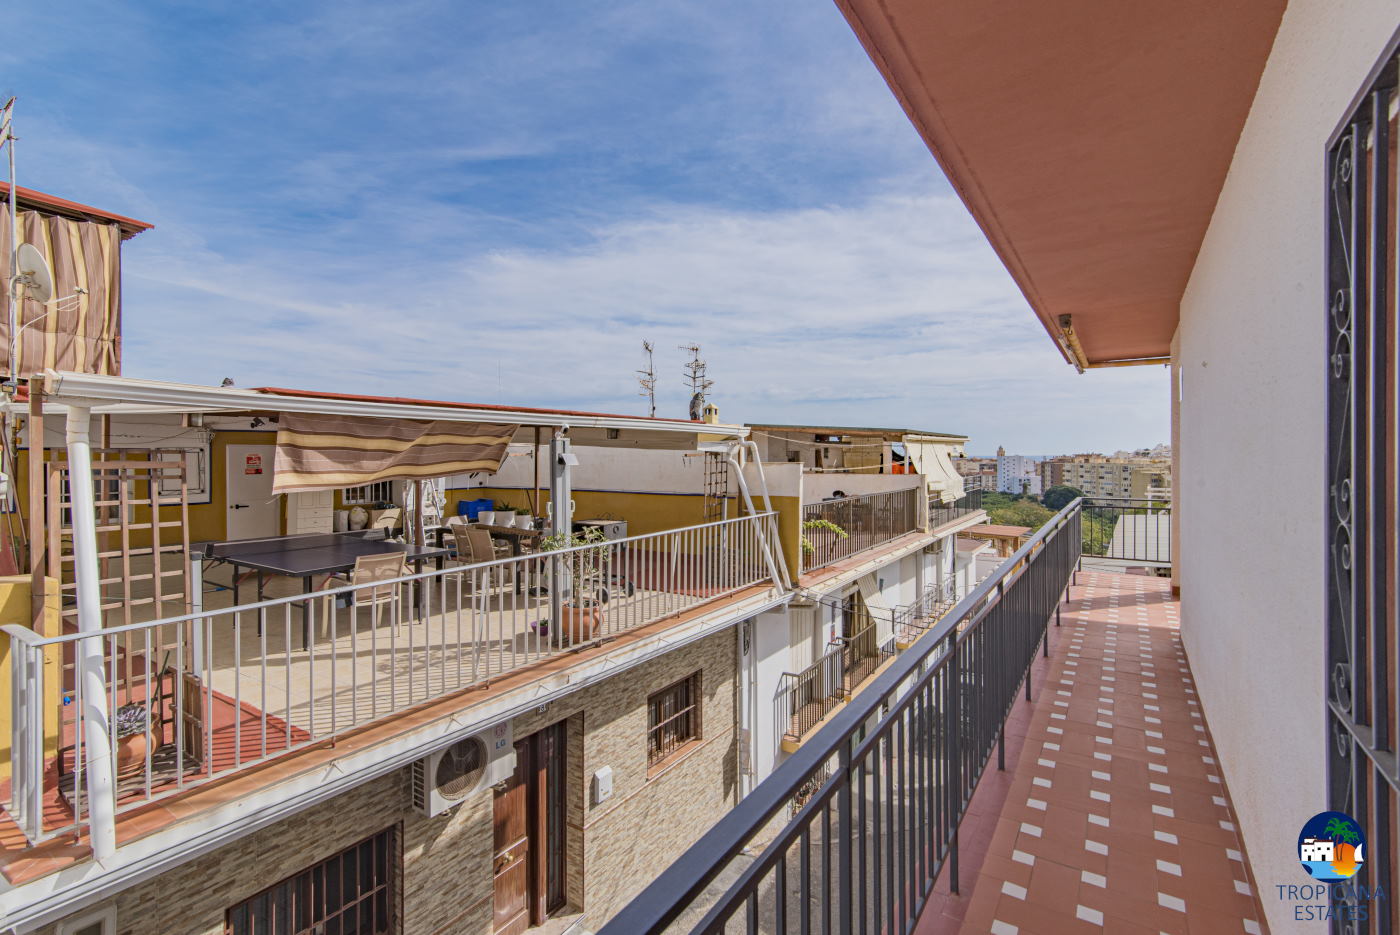 SPACIOUS TOWN HOUSE WITH ROOF TERRACE, ALMUÑECAR